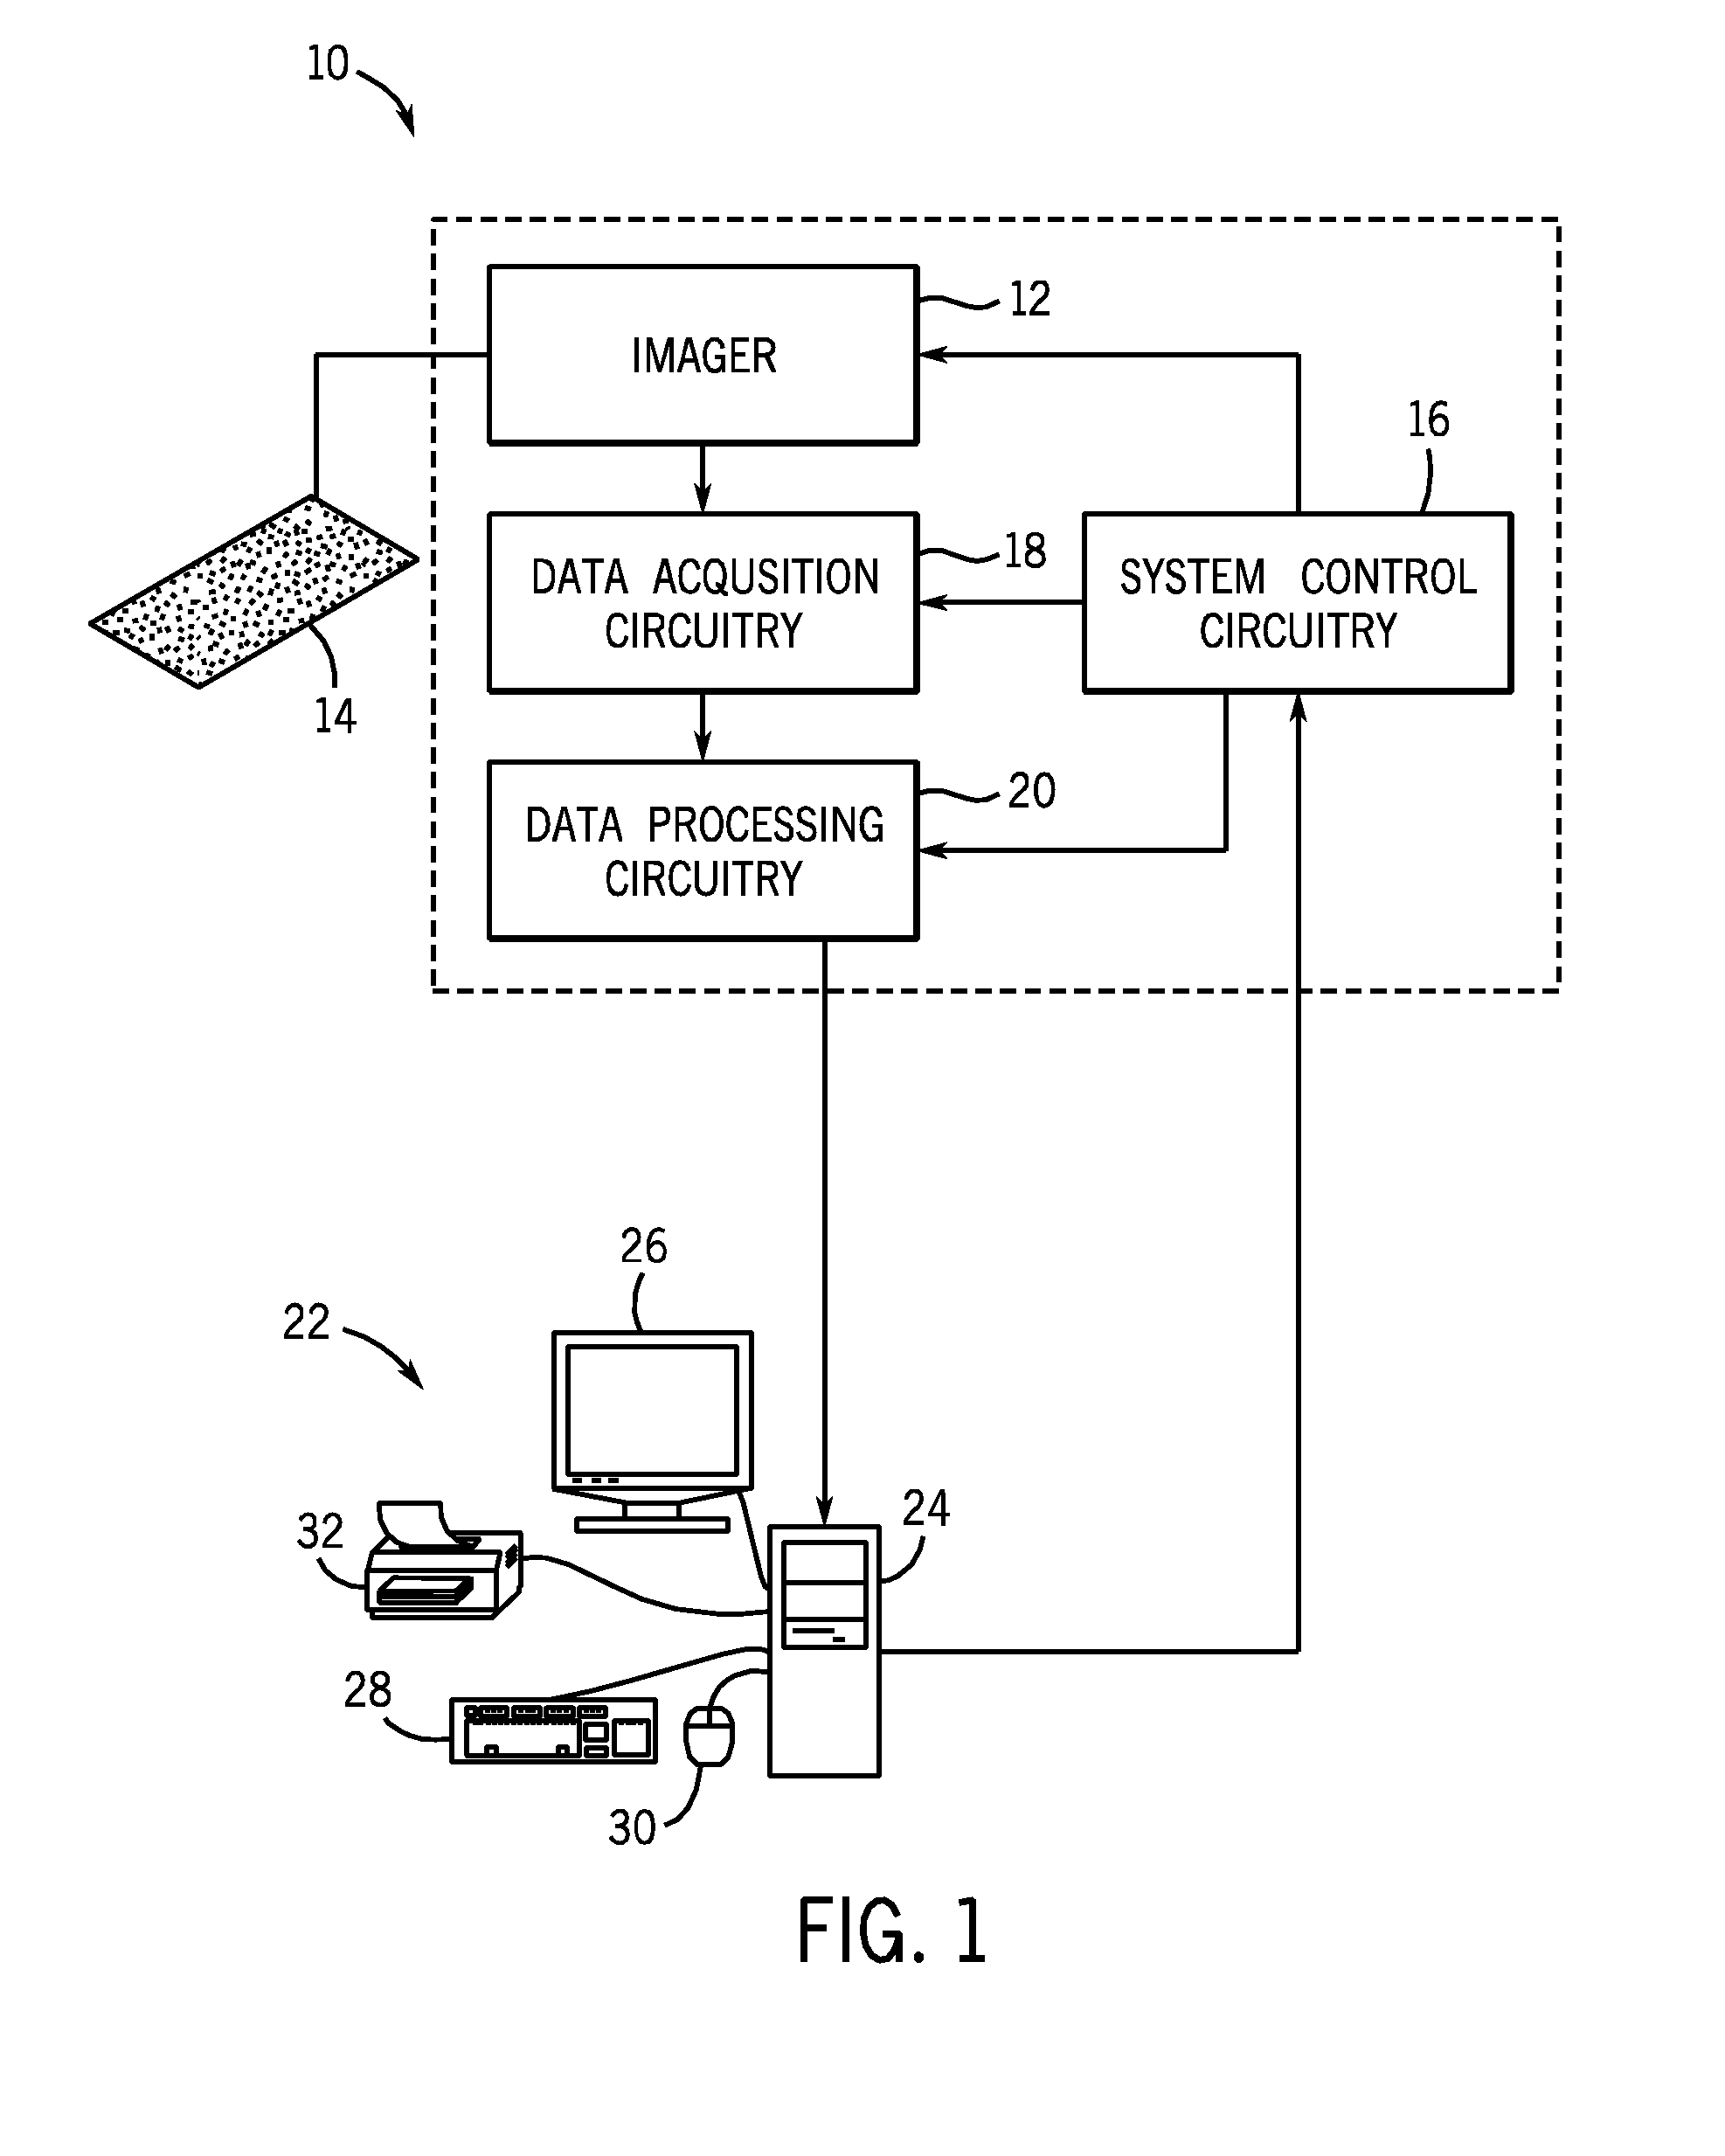 Method and apparatus for analysis of tissue microarrays